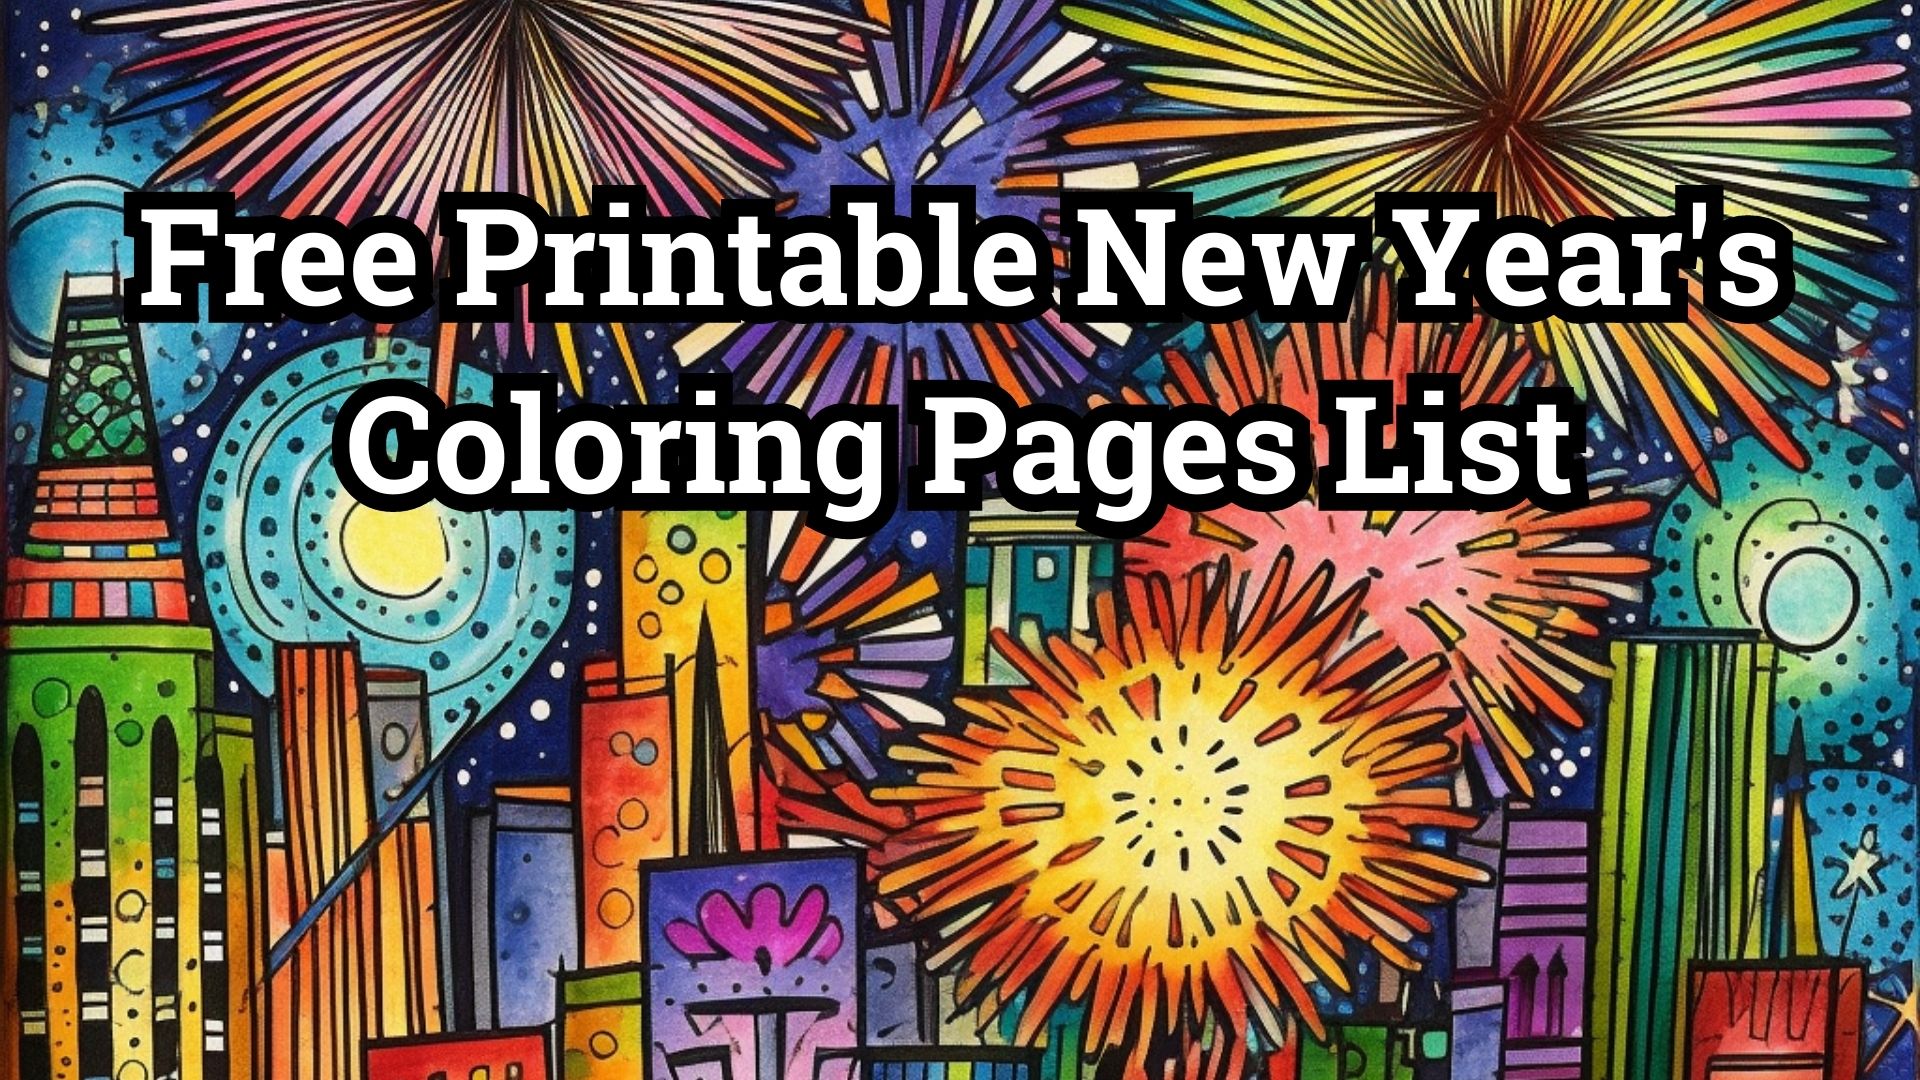 Free Printable New Year’s Coloring Pages List